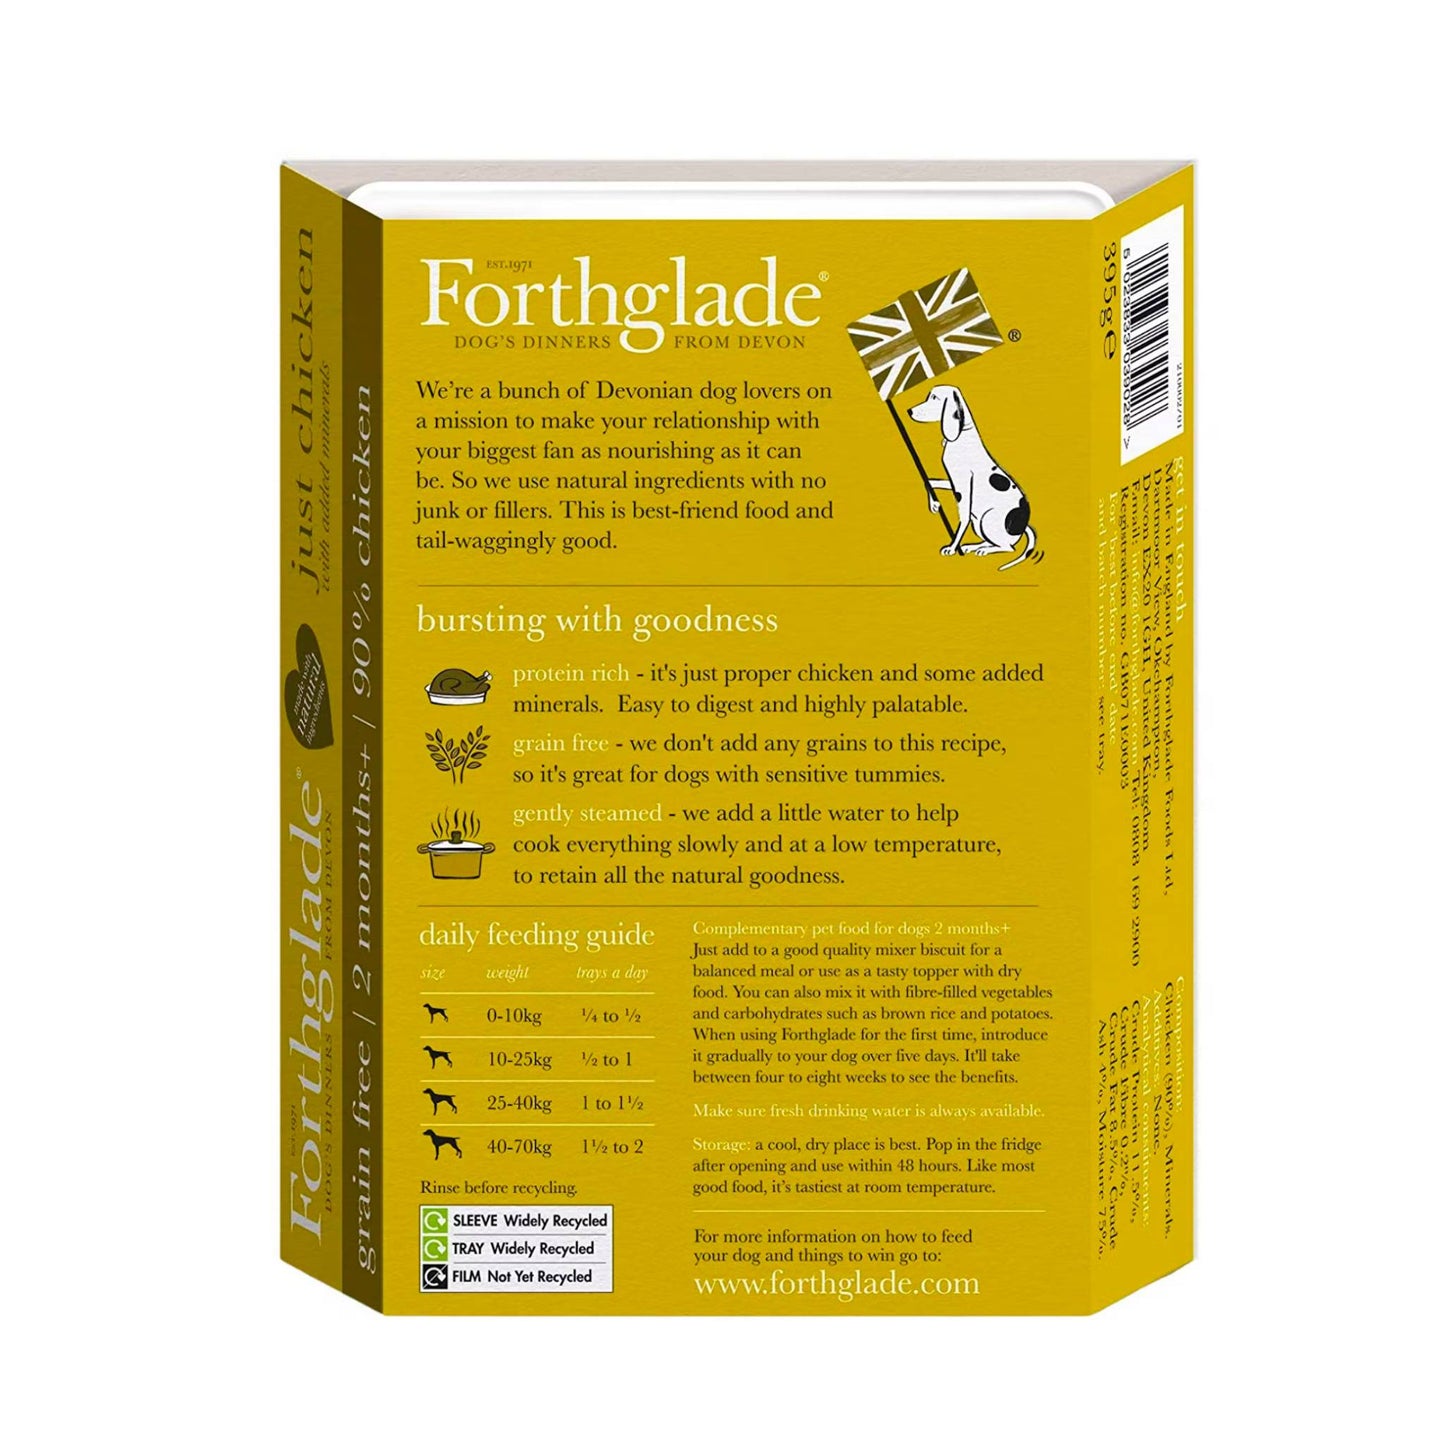 Forthglade Just Chicken ingredients and feeding guide.